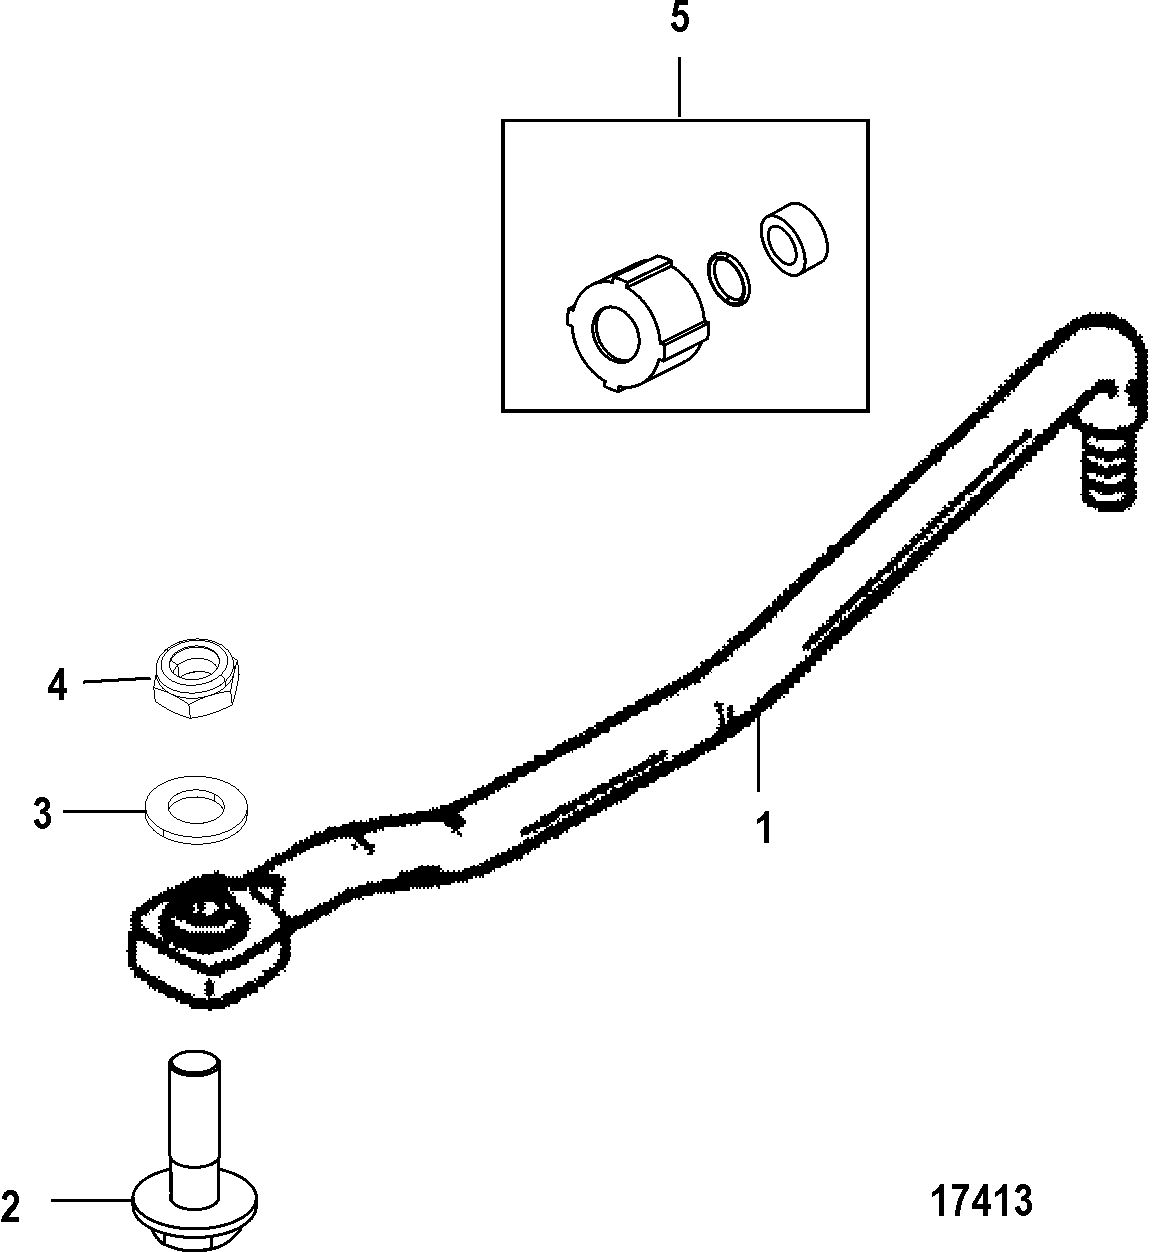 ACCESSORIES STEERING SYSTEMS AND COMPONENTS Steering Kit(19609A5 and 19608A11)